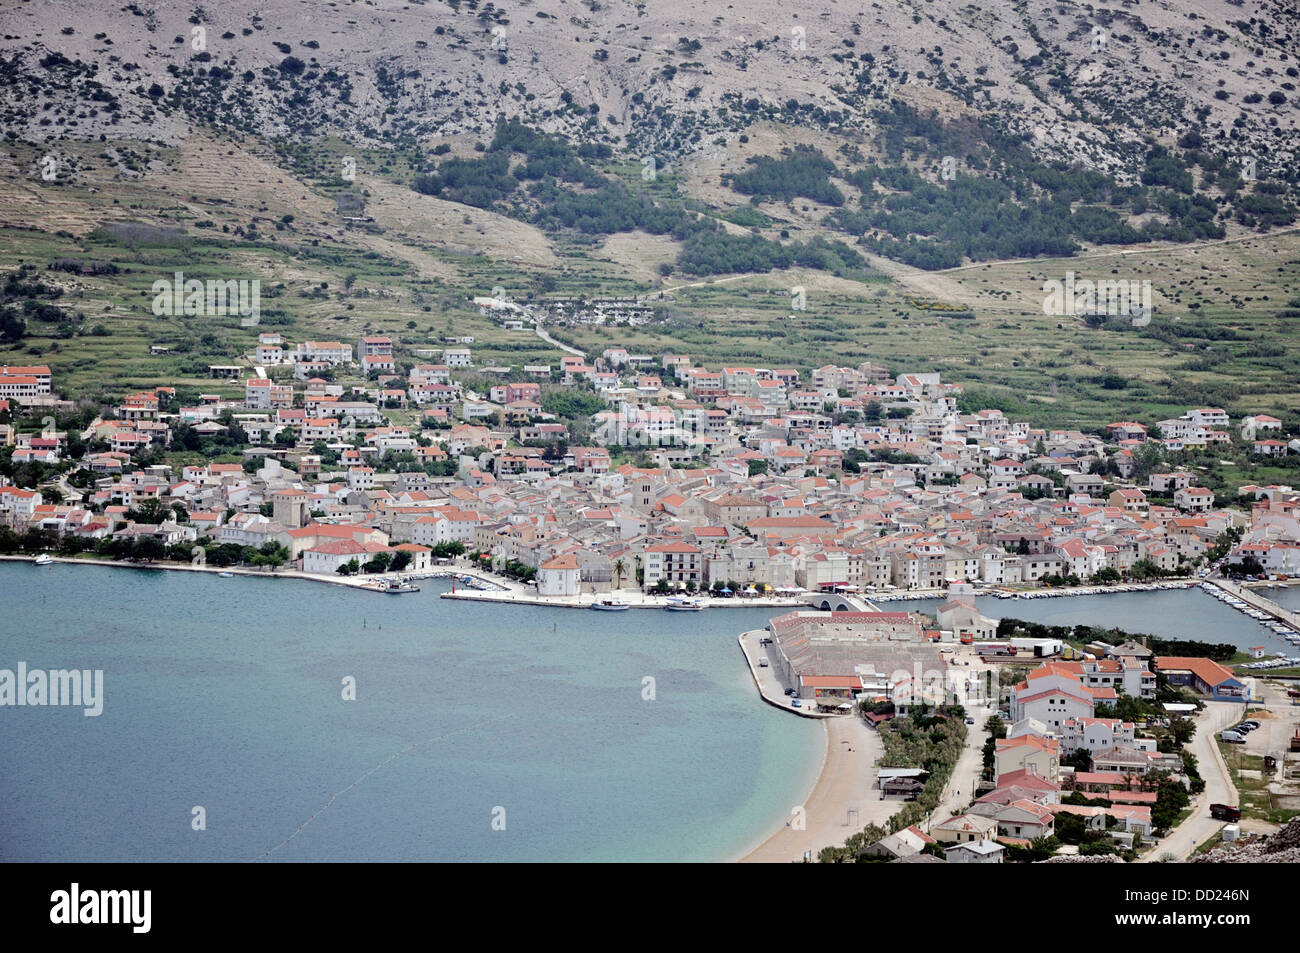 Insel Pag Ansicht, Stadt Pag, Kroatien, Europa Stockfoto